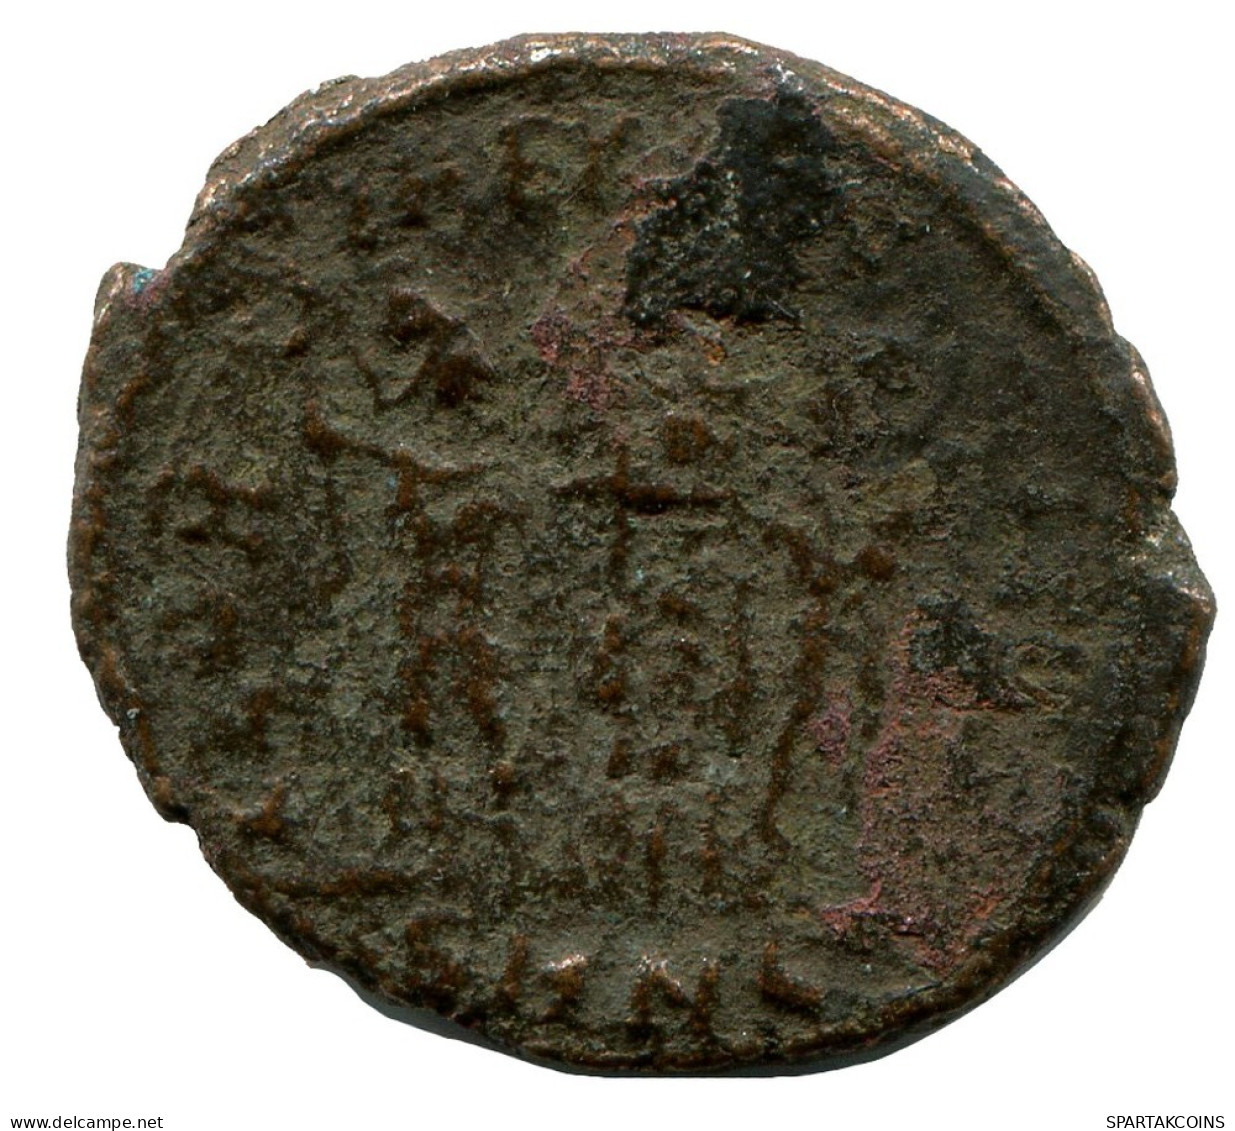 CONSTANTINE I MINTED IN NICOMEDIA FOUND IN IHNASYAH HOARD EGYPT #ANC10850.14.D.A - L'Empire Chrétien (307 à 363)